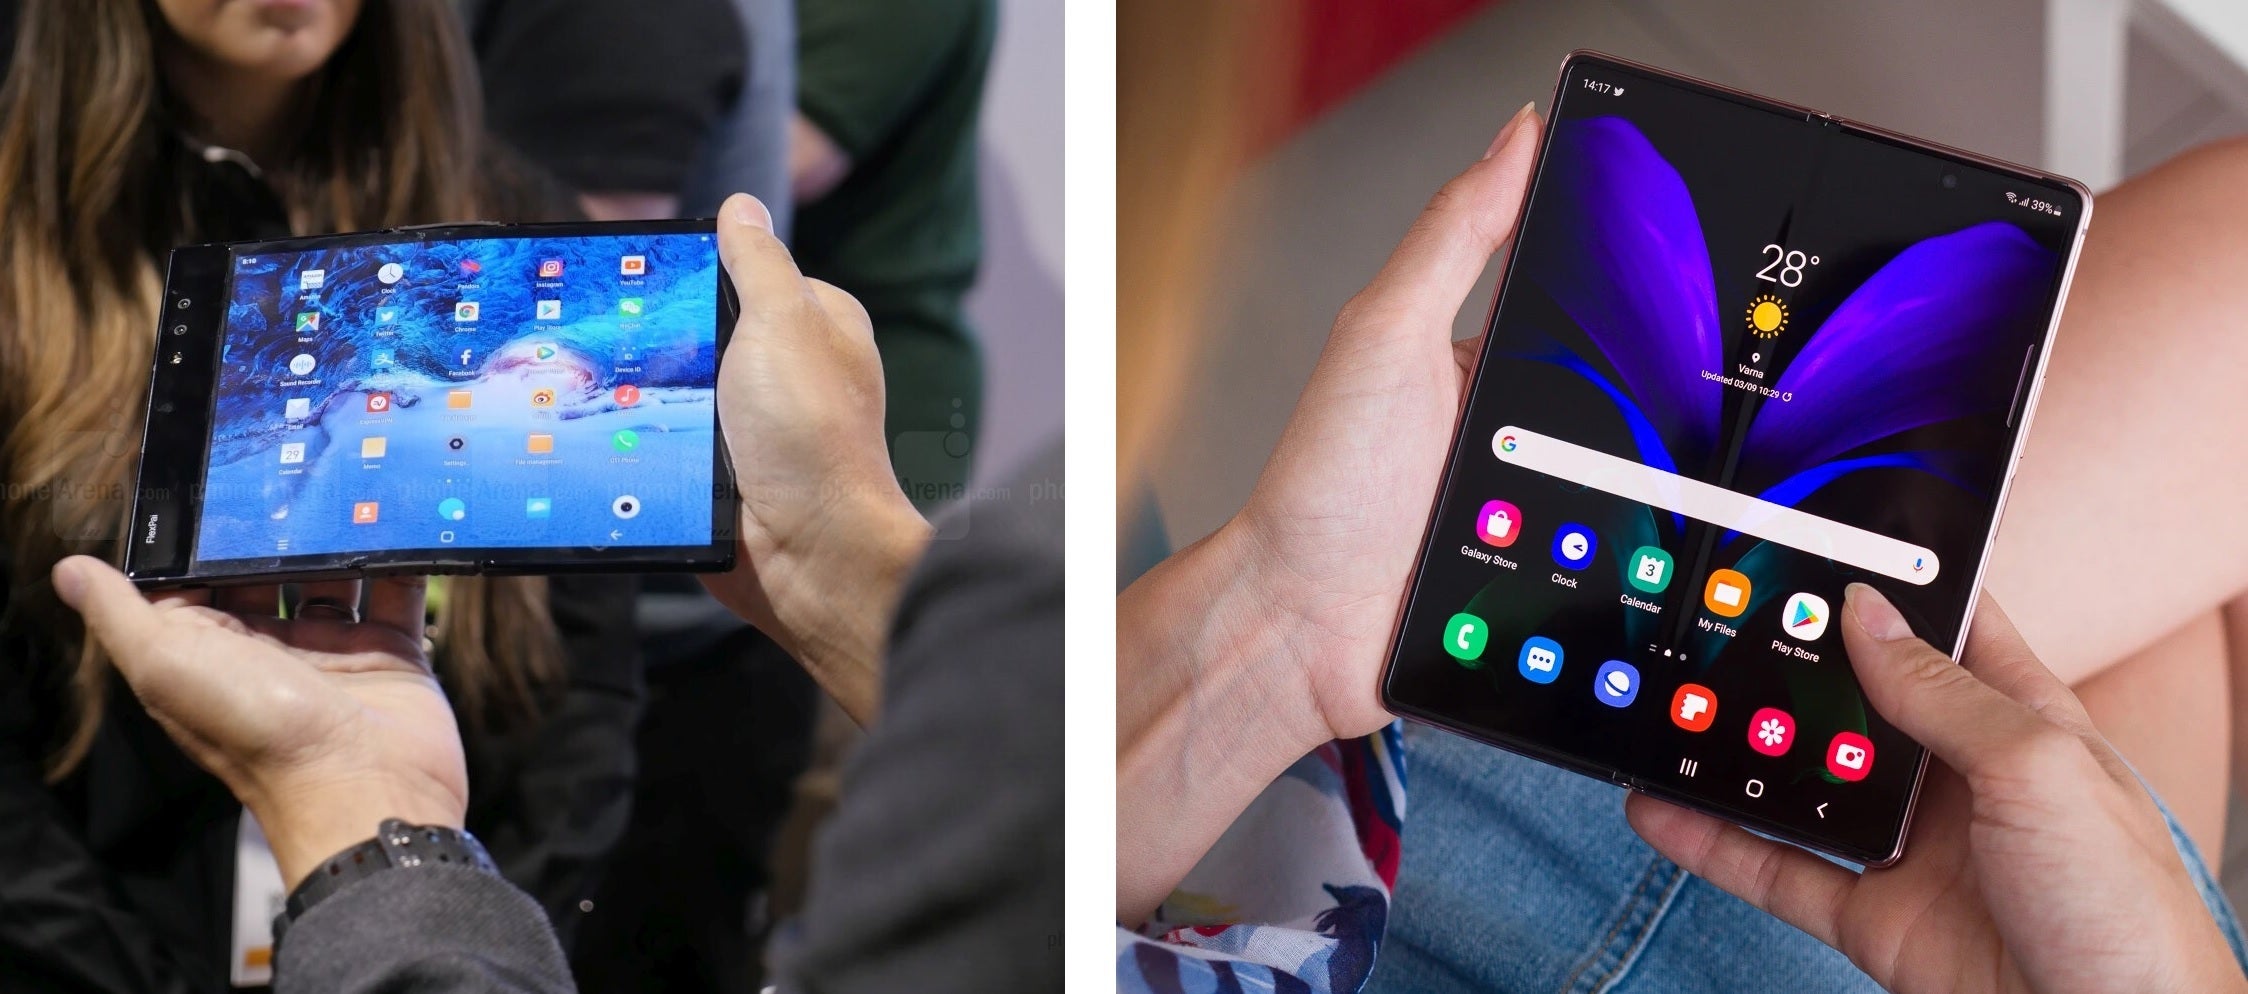 The Royole FlexPai (left) and the Samsung Galaxy Z Fold 2 (right) - Will the Google Pixel Fold usher in a folding phone renaissance?